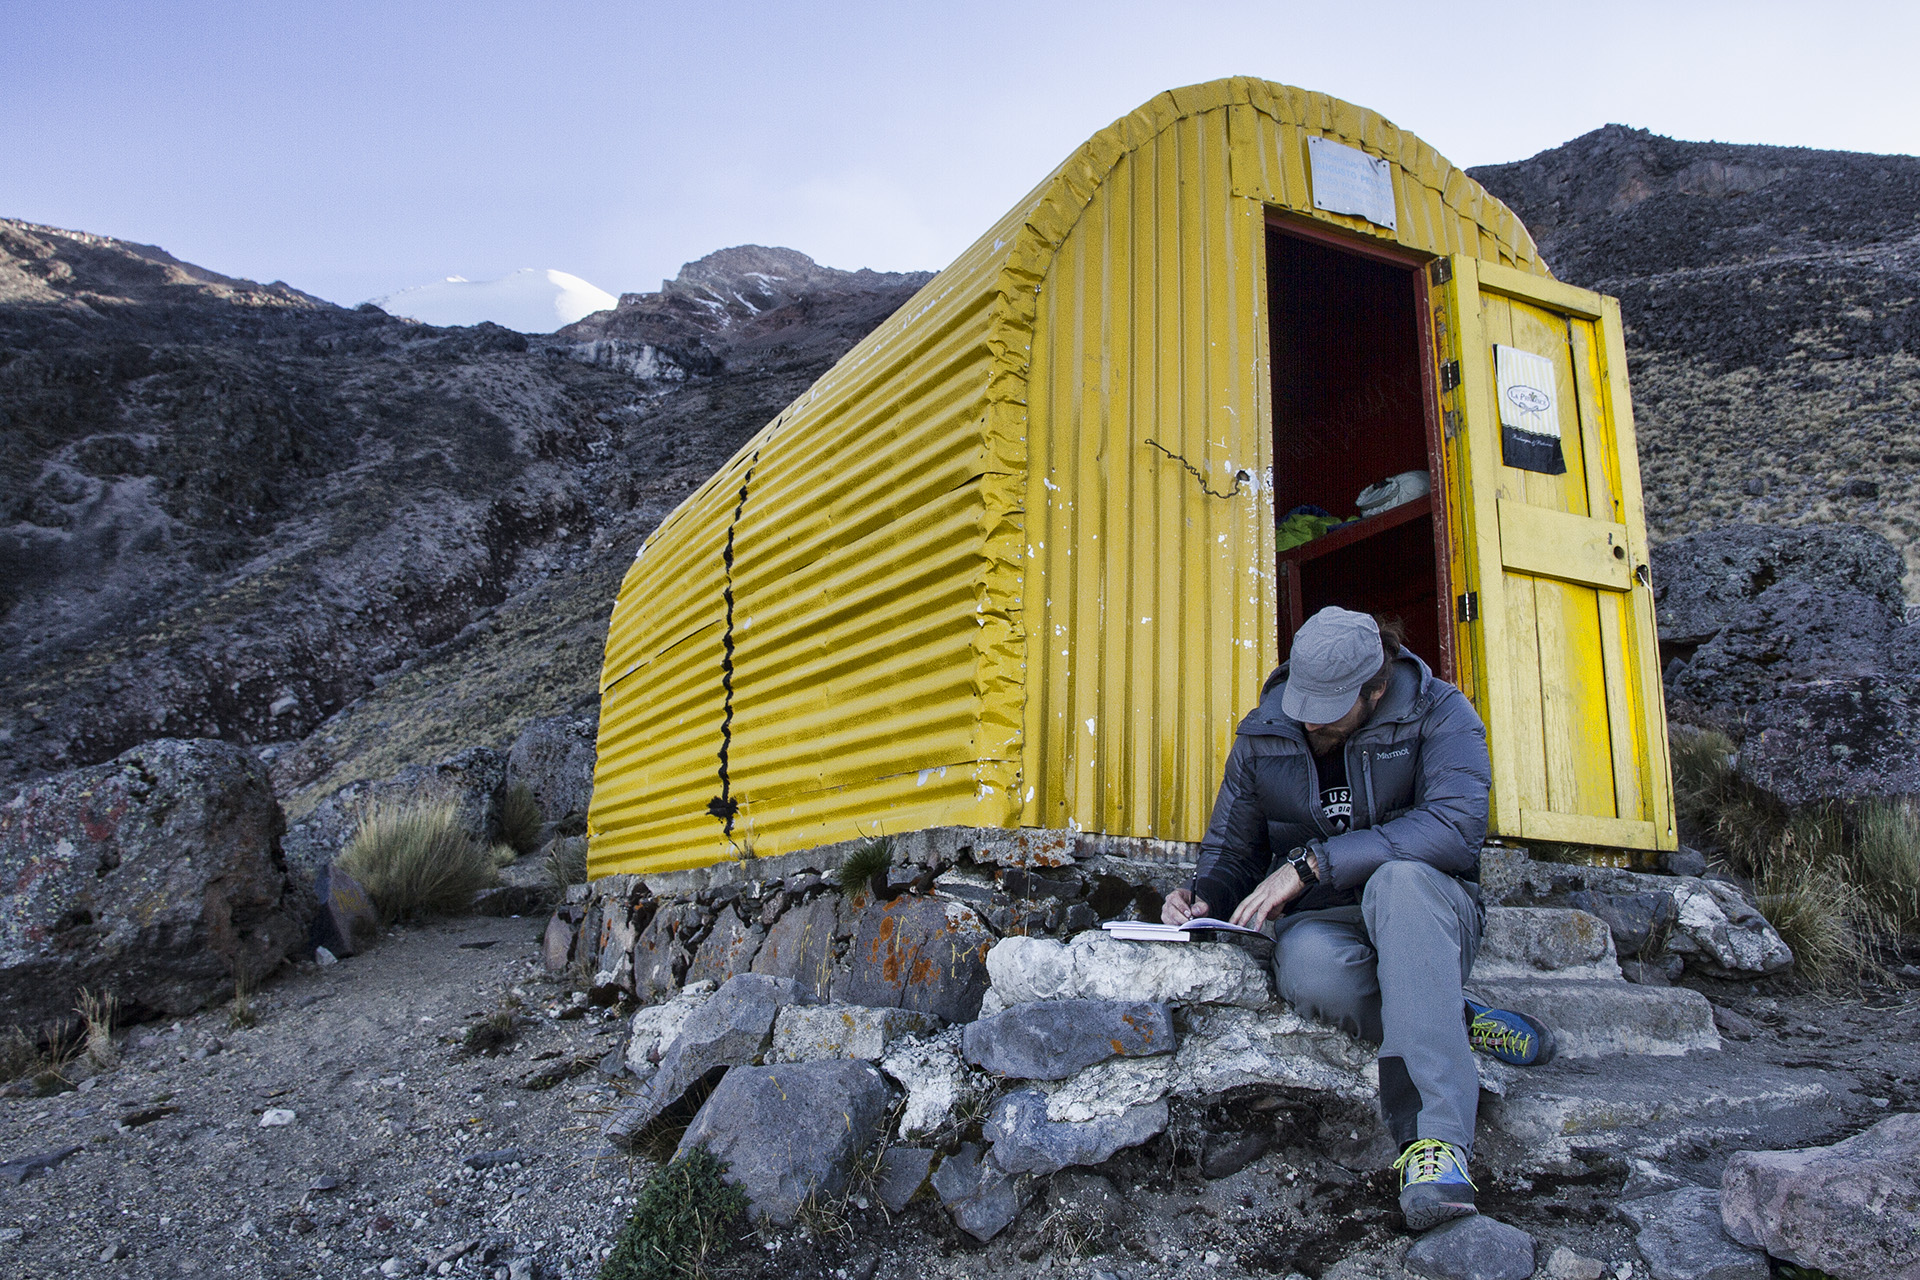  A couple hundred feet away from the  Piedra Grande  hut, a small, yellow tin shed hut sits amongst the car-sized boulders. The small space inside the hut is just large enough for the both of us and our gear.&nbsp; 